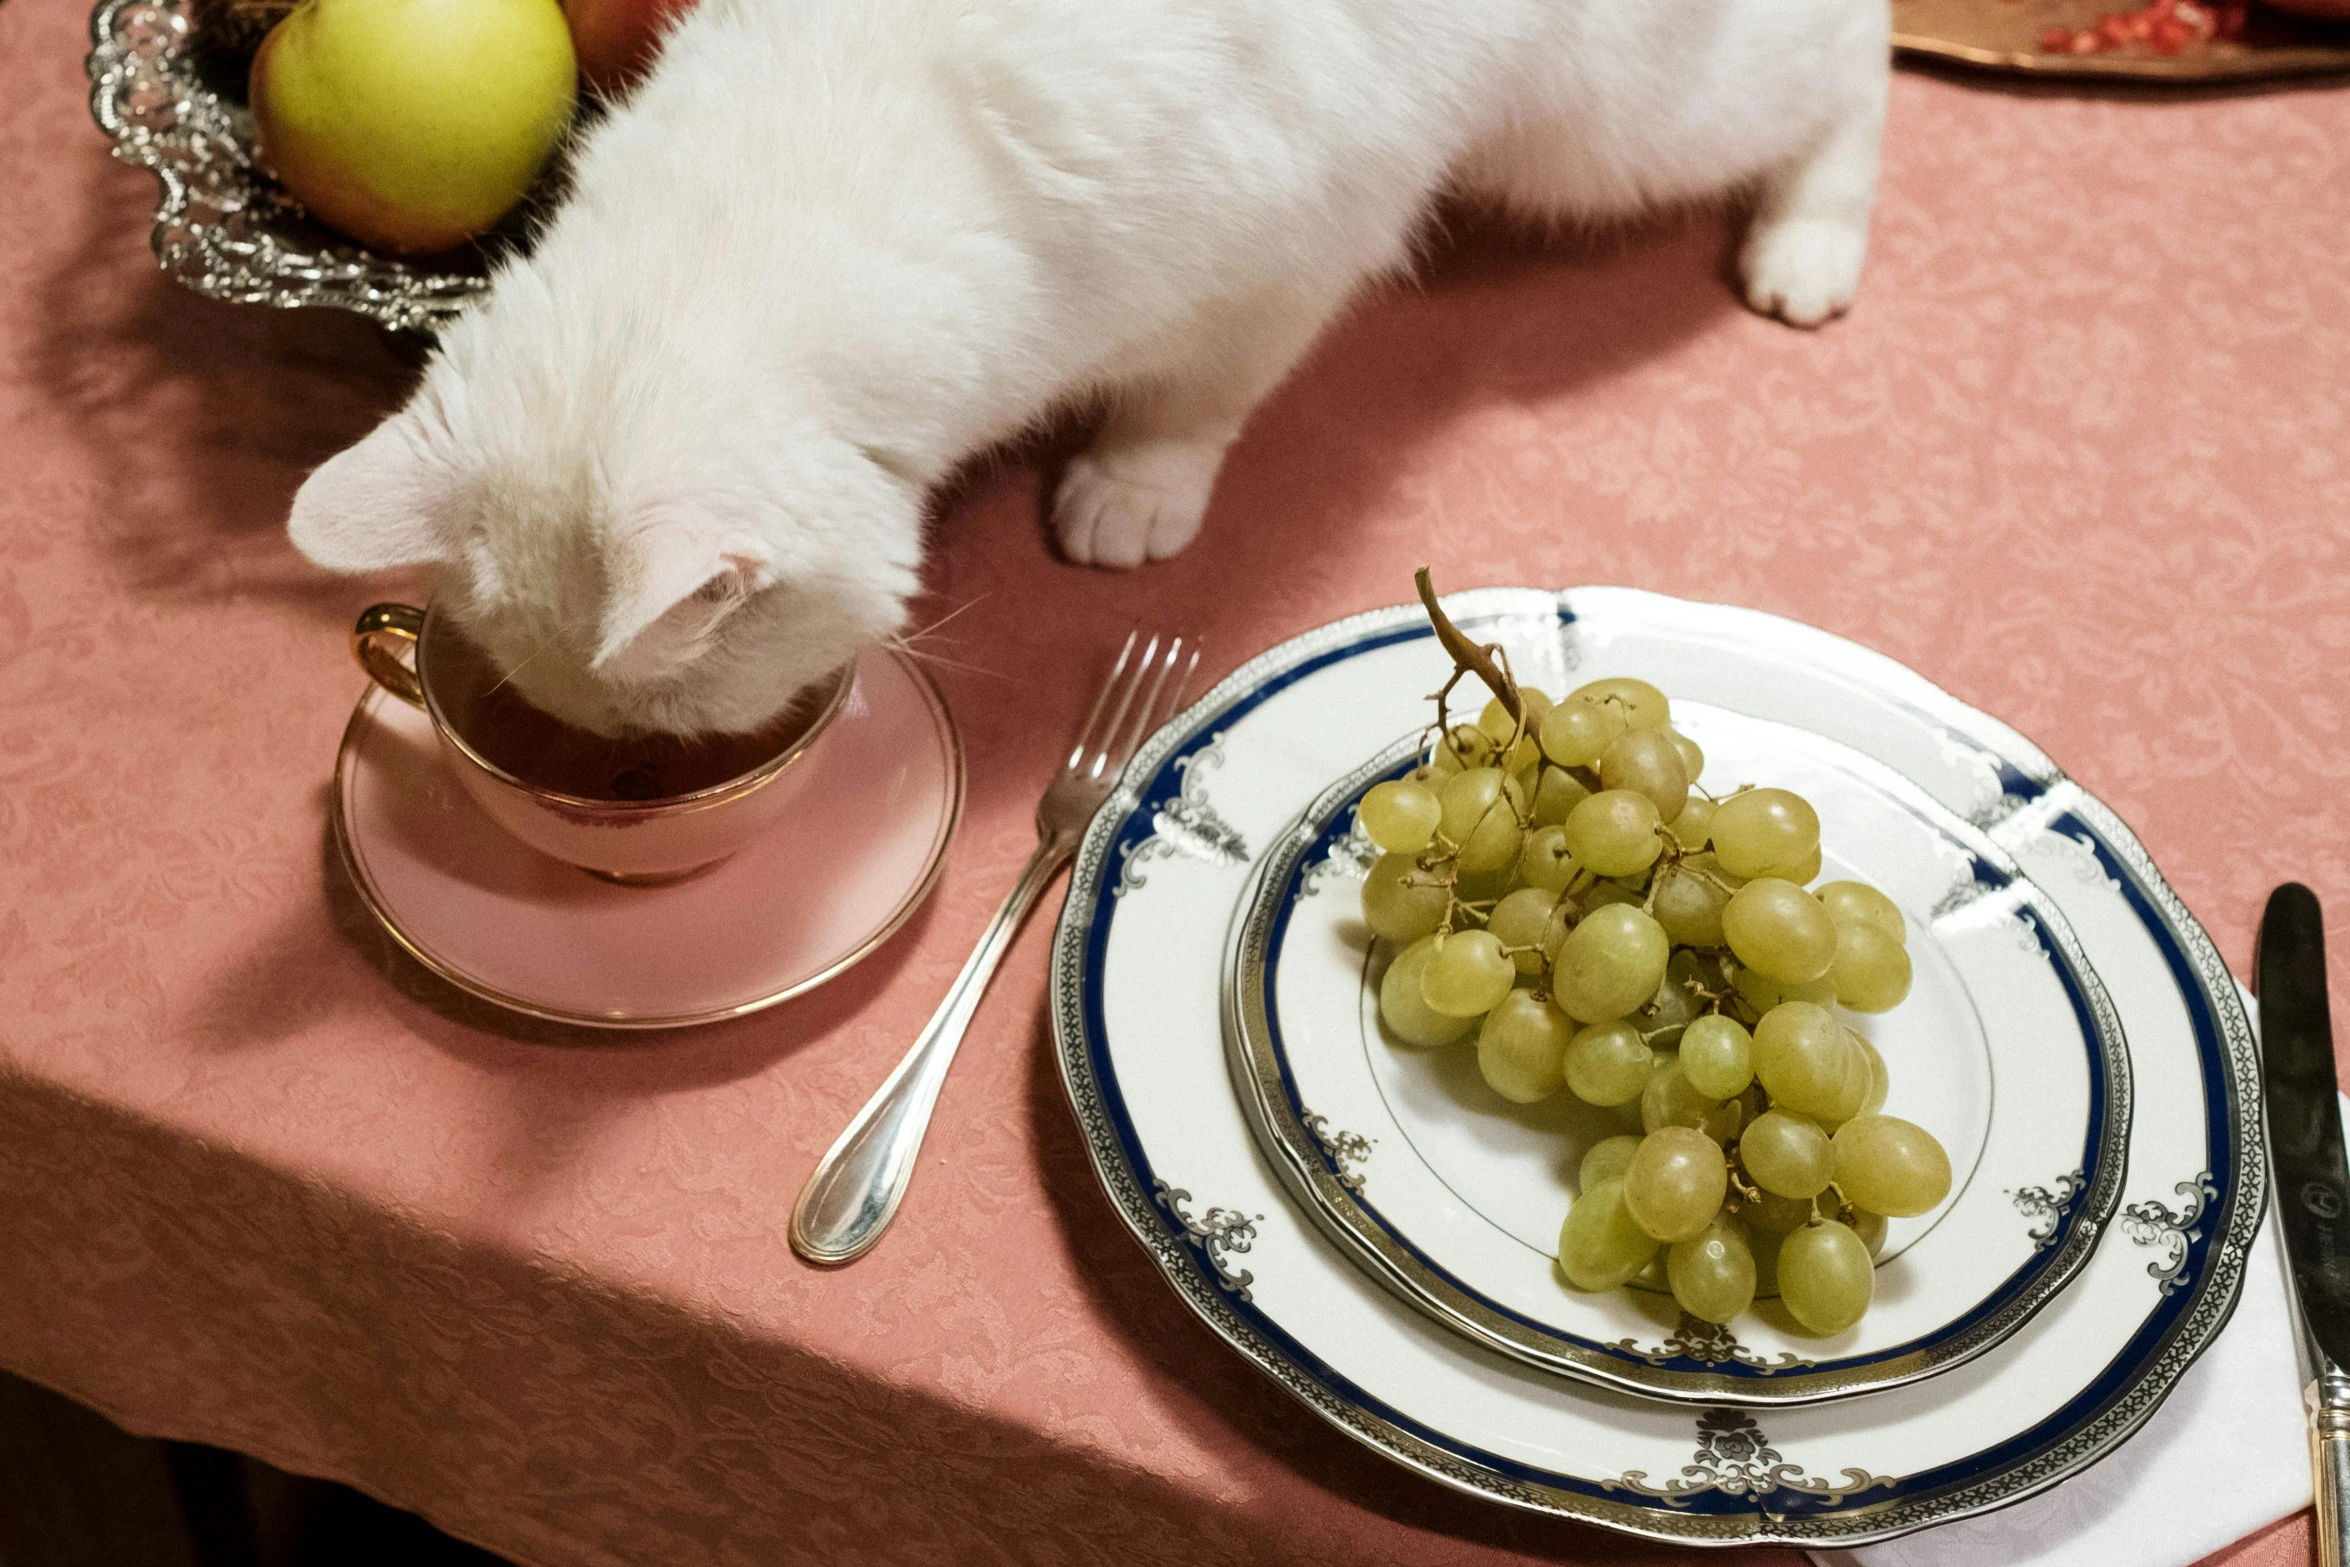 a white cat standing on top of a table next to a plate of grapes, tea party, promo image, getty images, having an awkward dinner date